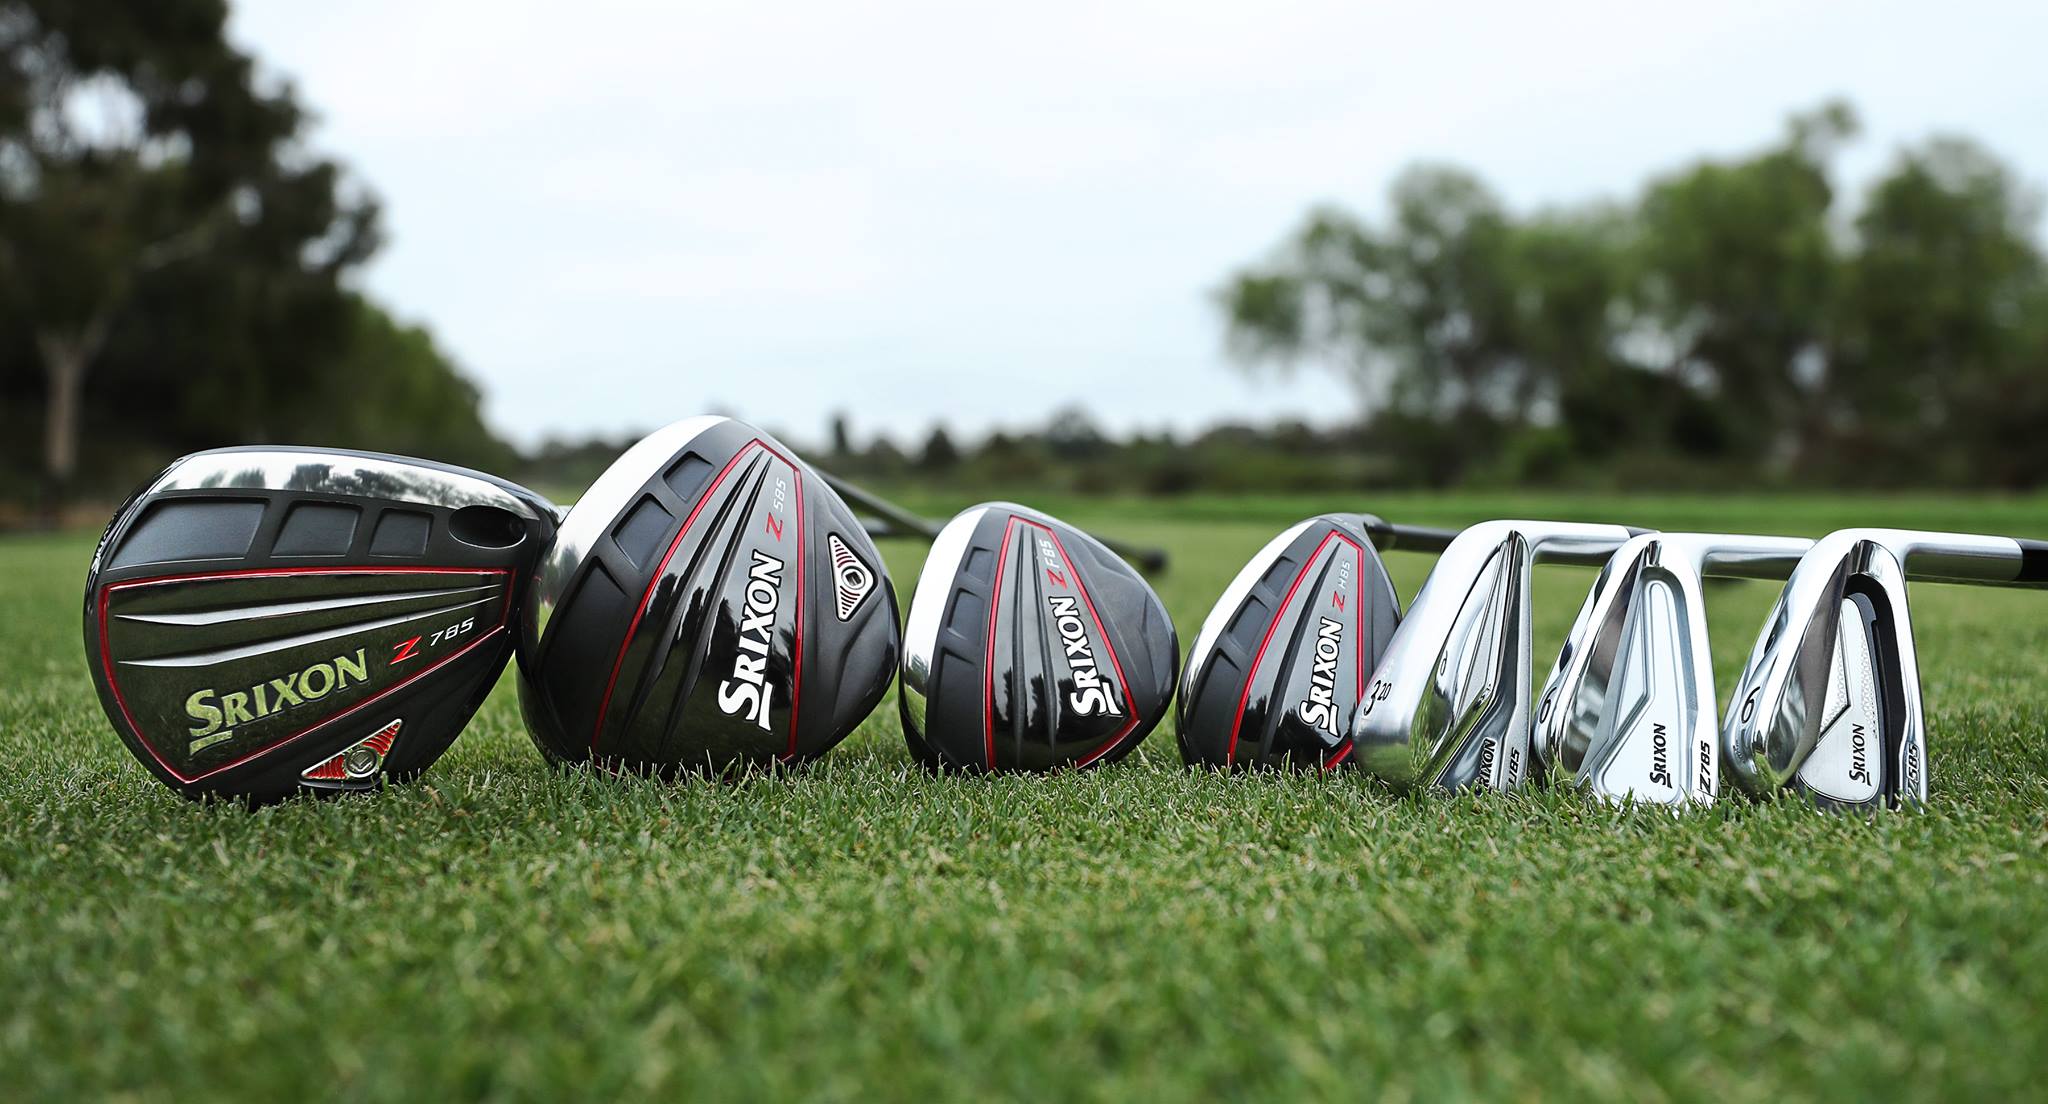 Srixon Golf Demo Day at Heritage Oaks Golf Course